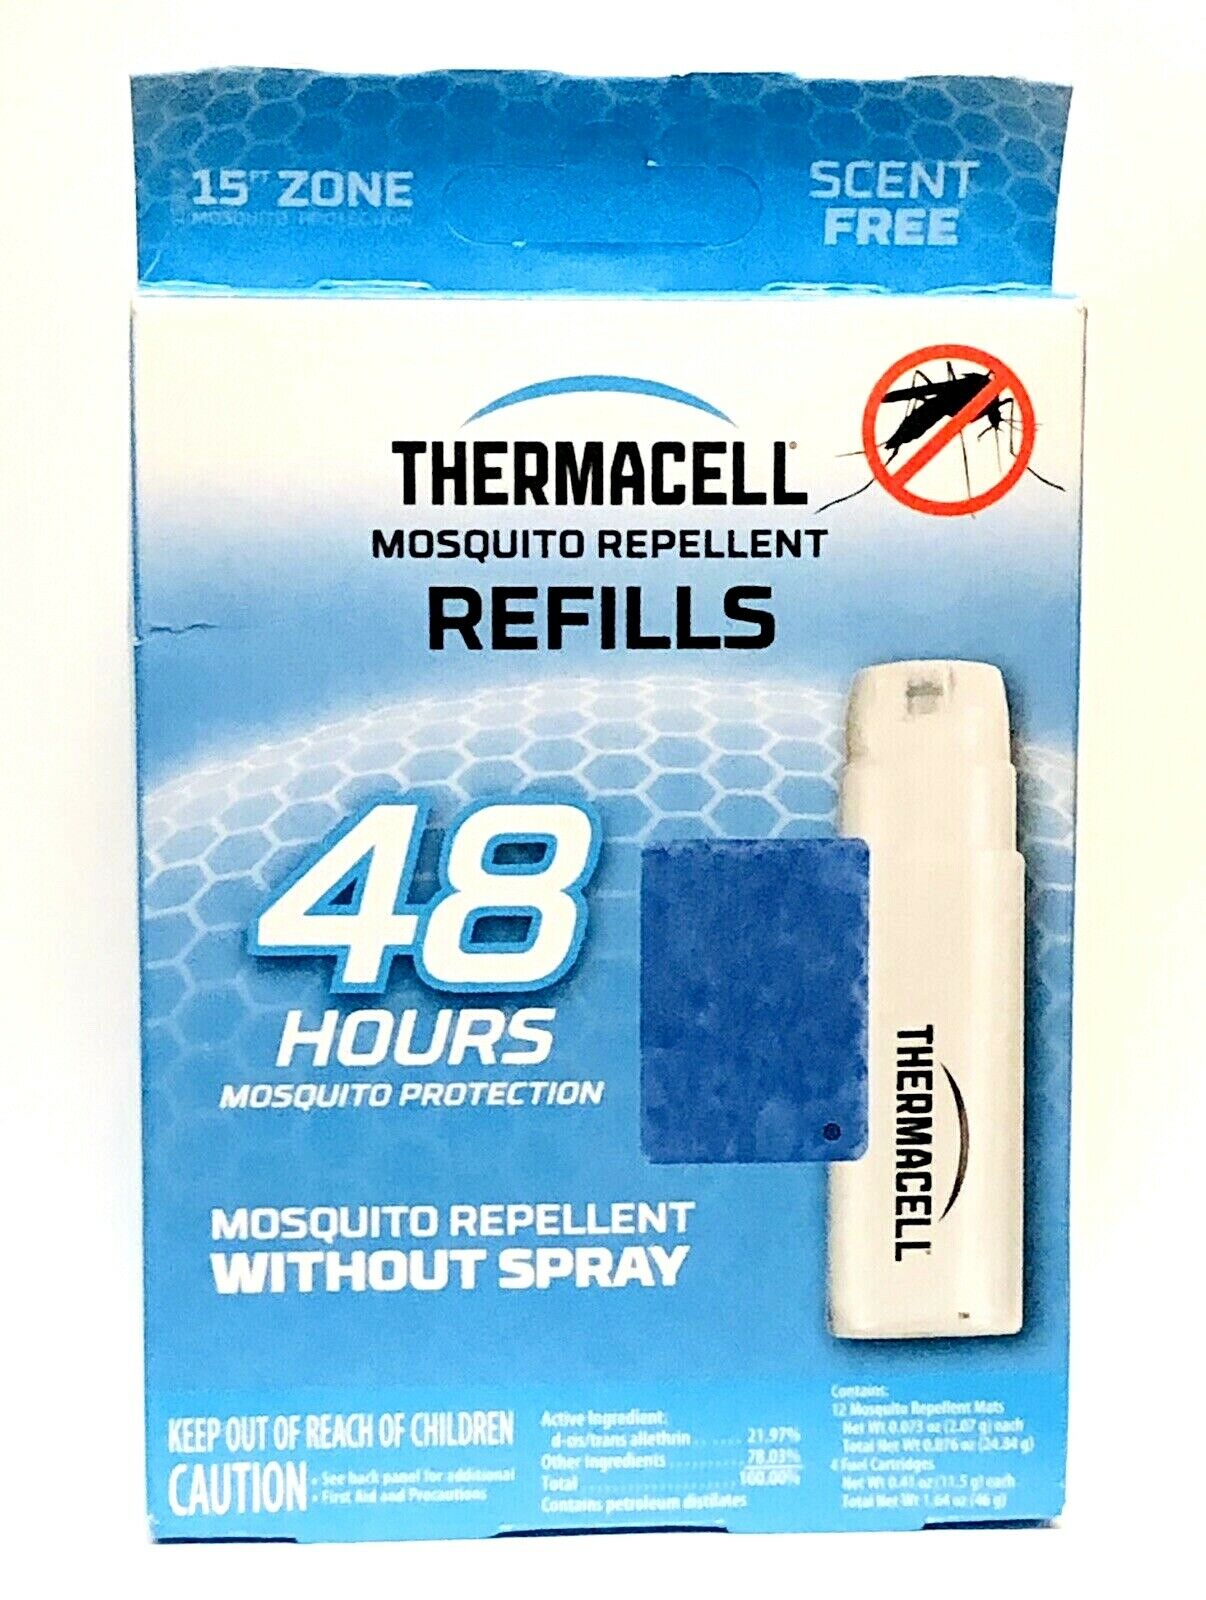 Thermacell Mosquito Repellent Refills, 48-hour Pack